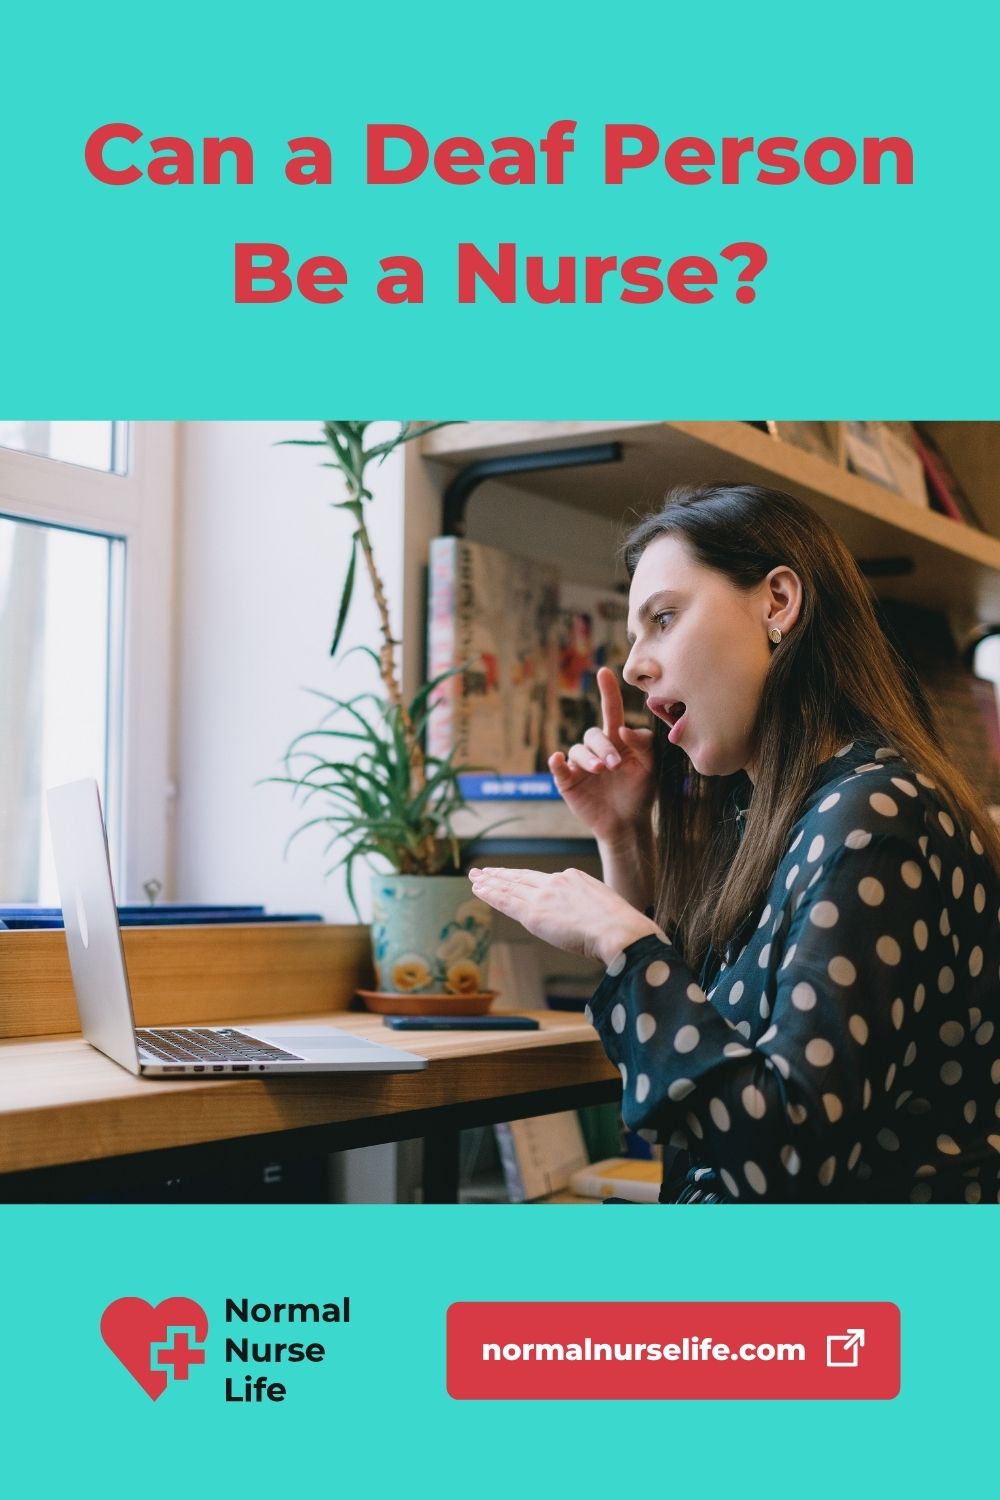 Can you be deaf and be a nurse?